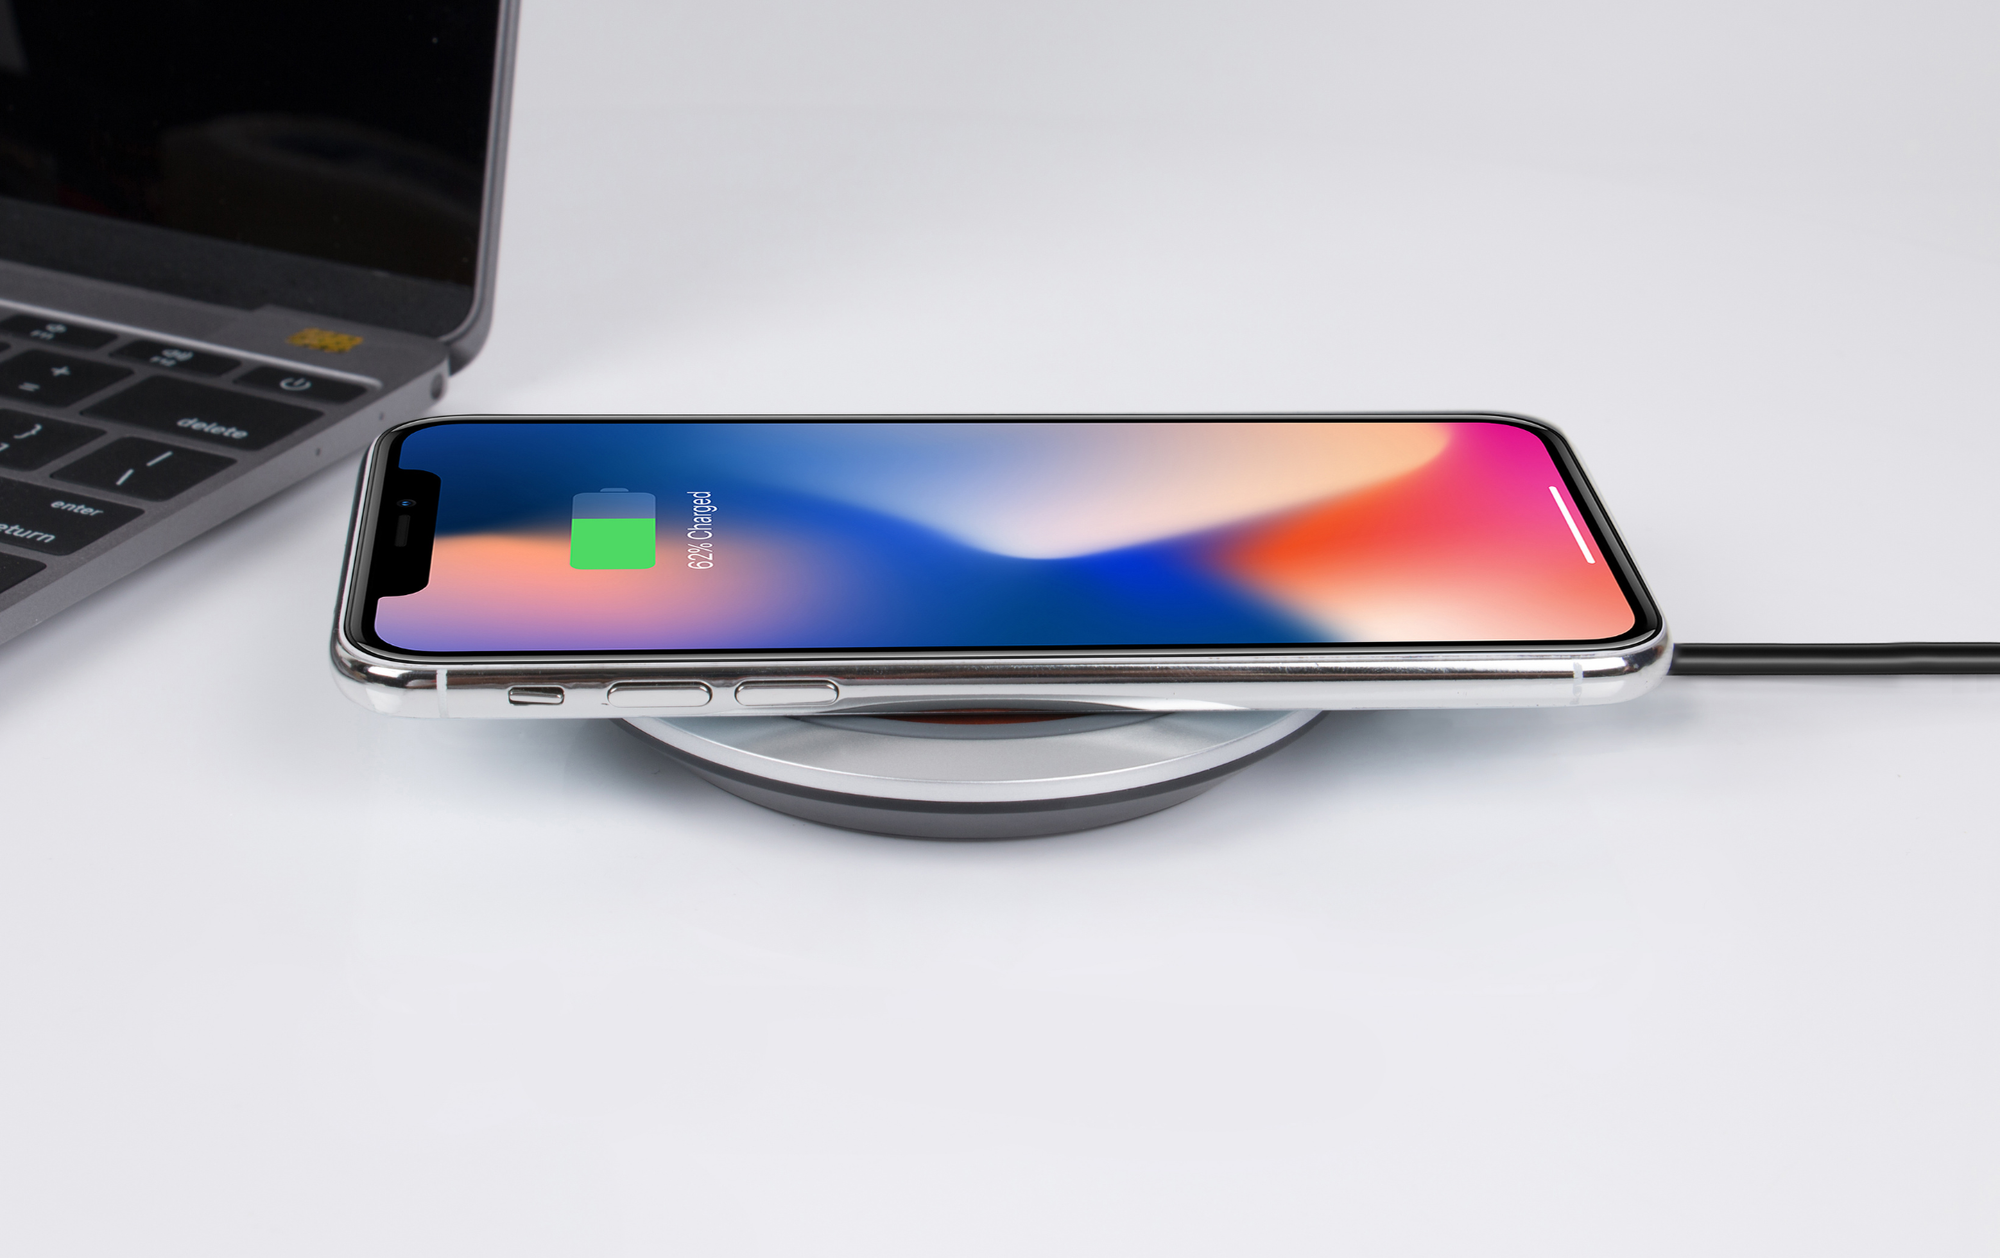 iPhone charging on wireless charging pad